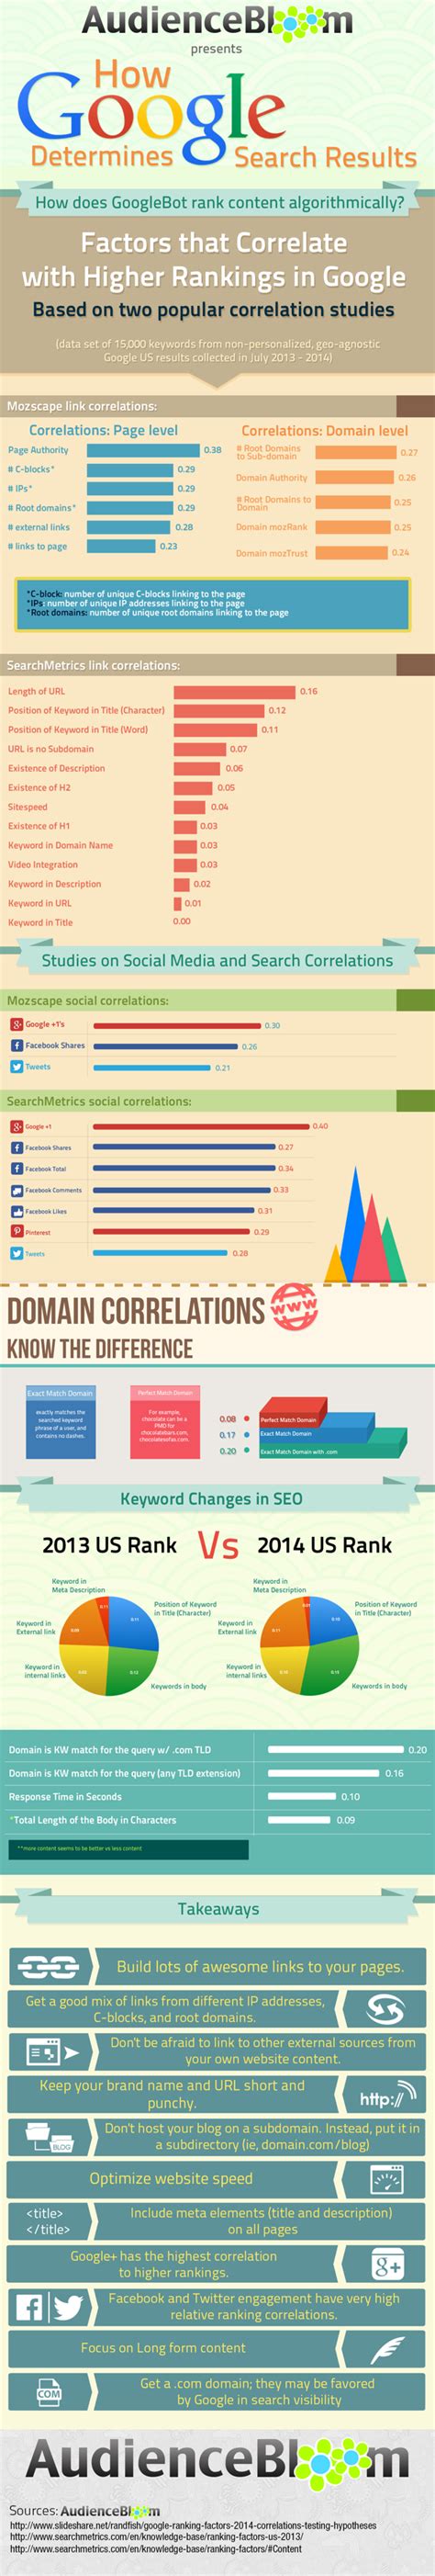 heres  google determines search results infographic marketing